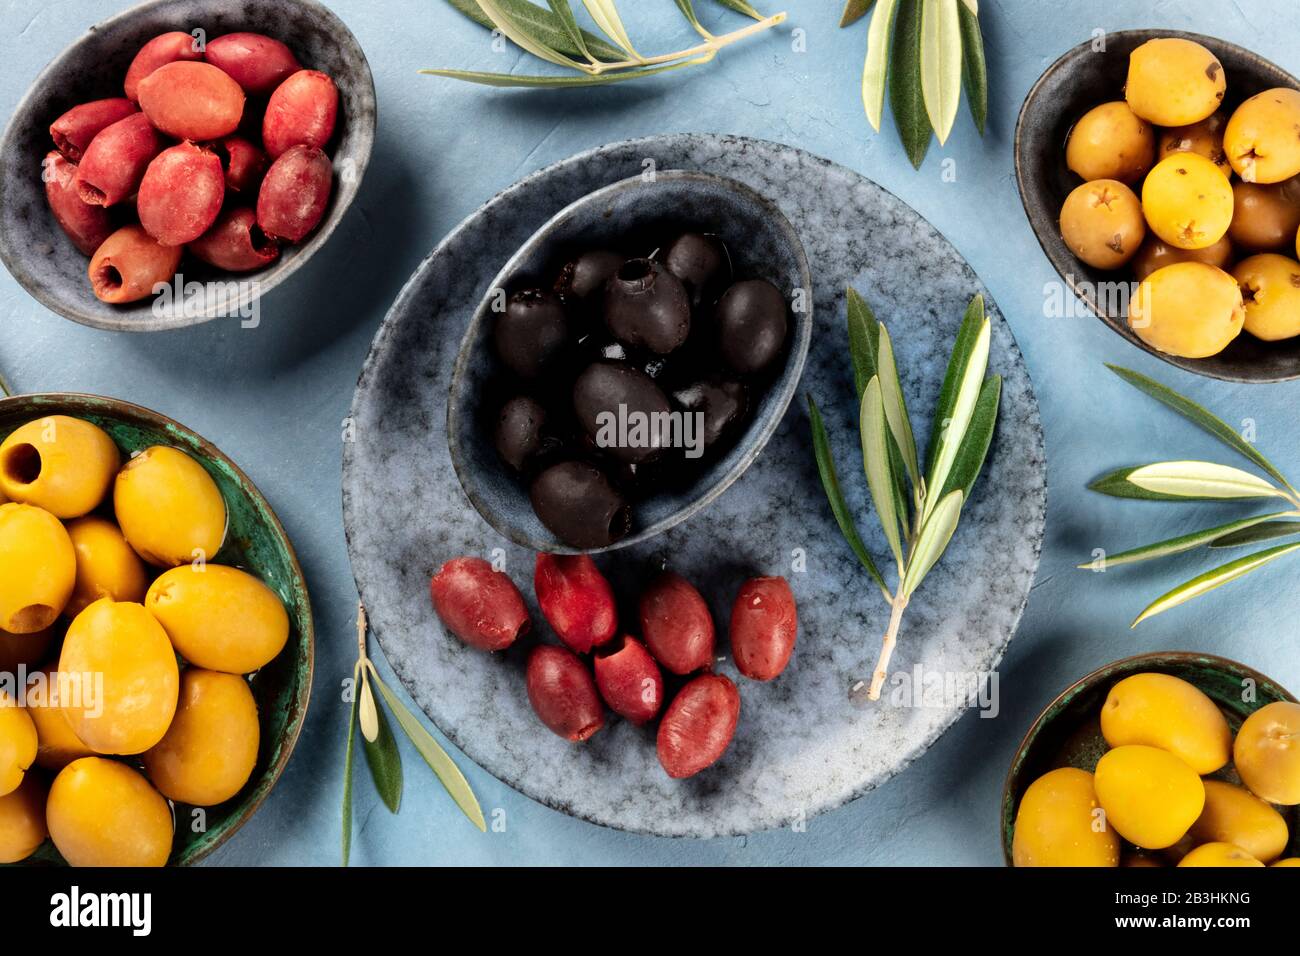 Olives, shot from the top. An assortment of green, black and red olives Stock Photo